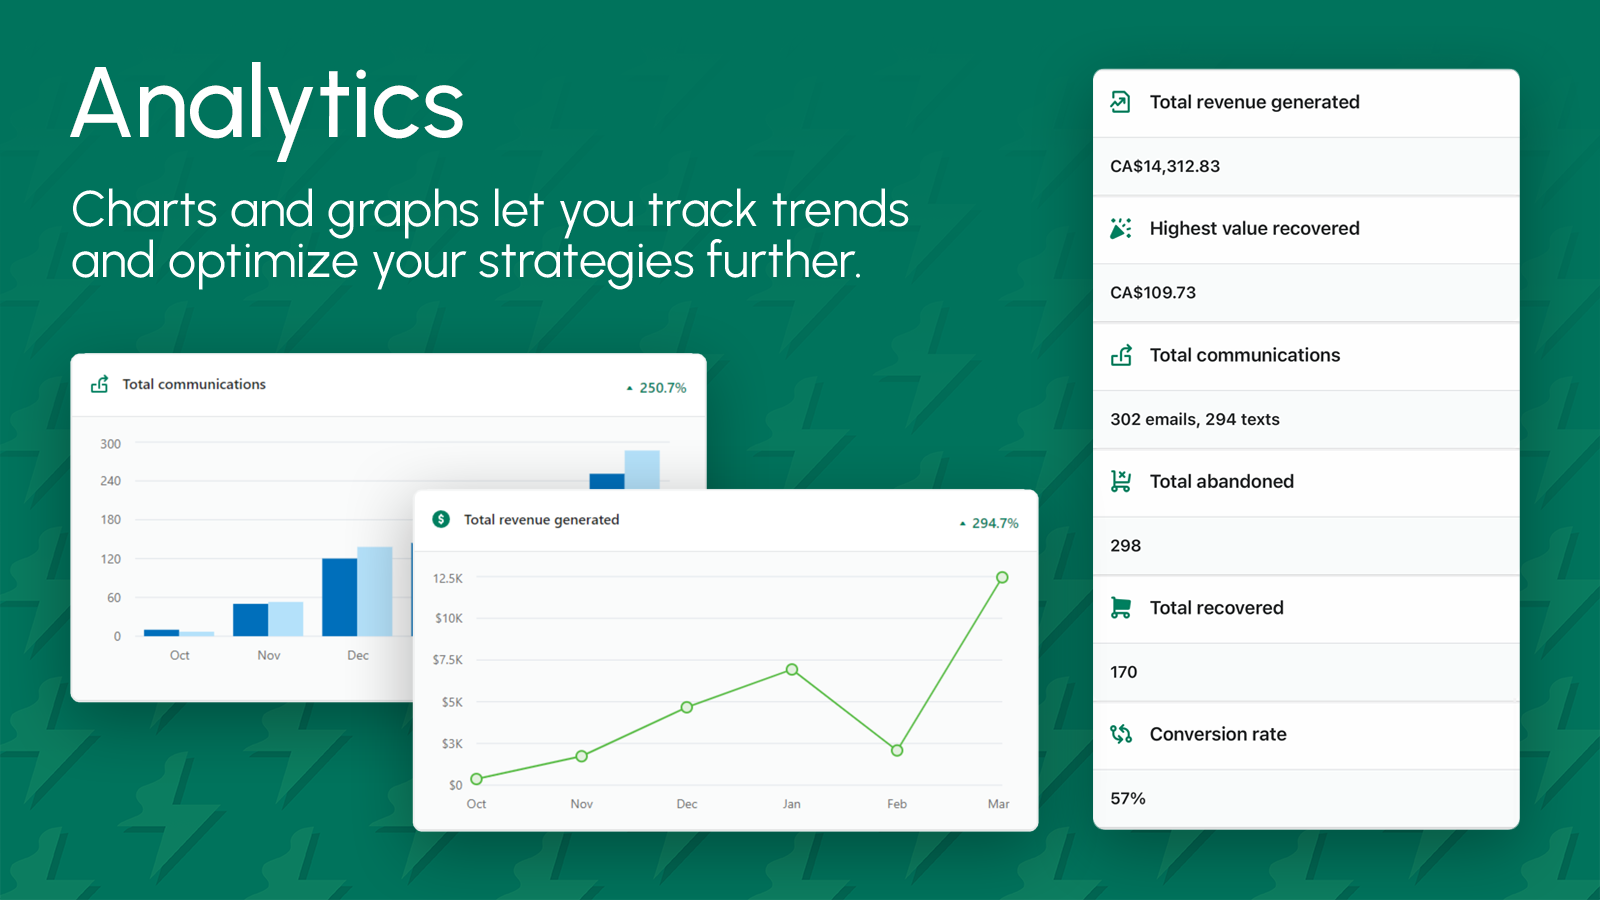 Use analytics to help you plan your strategies better